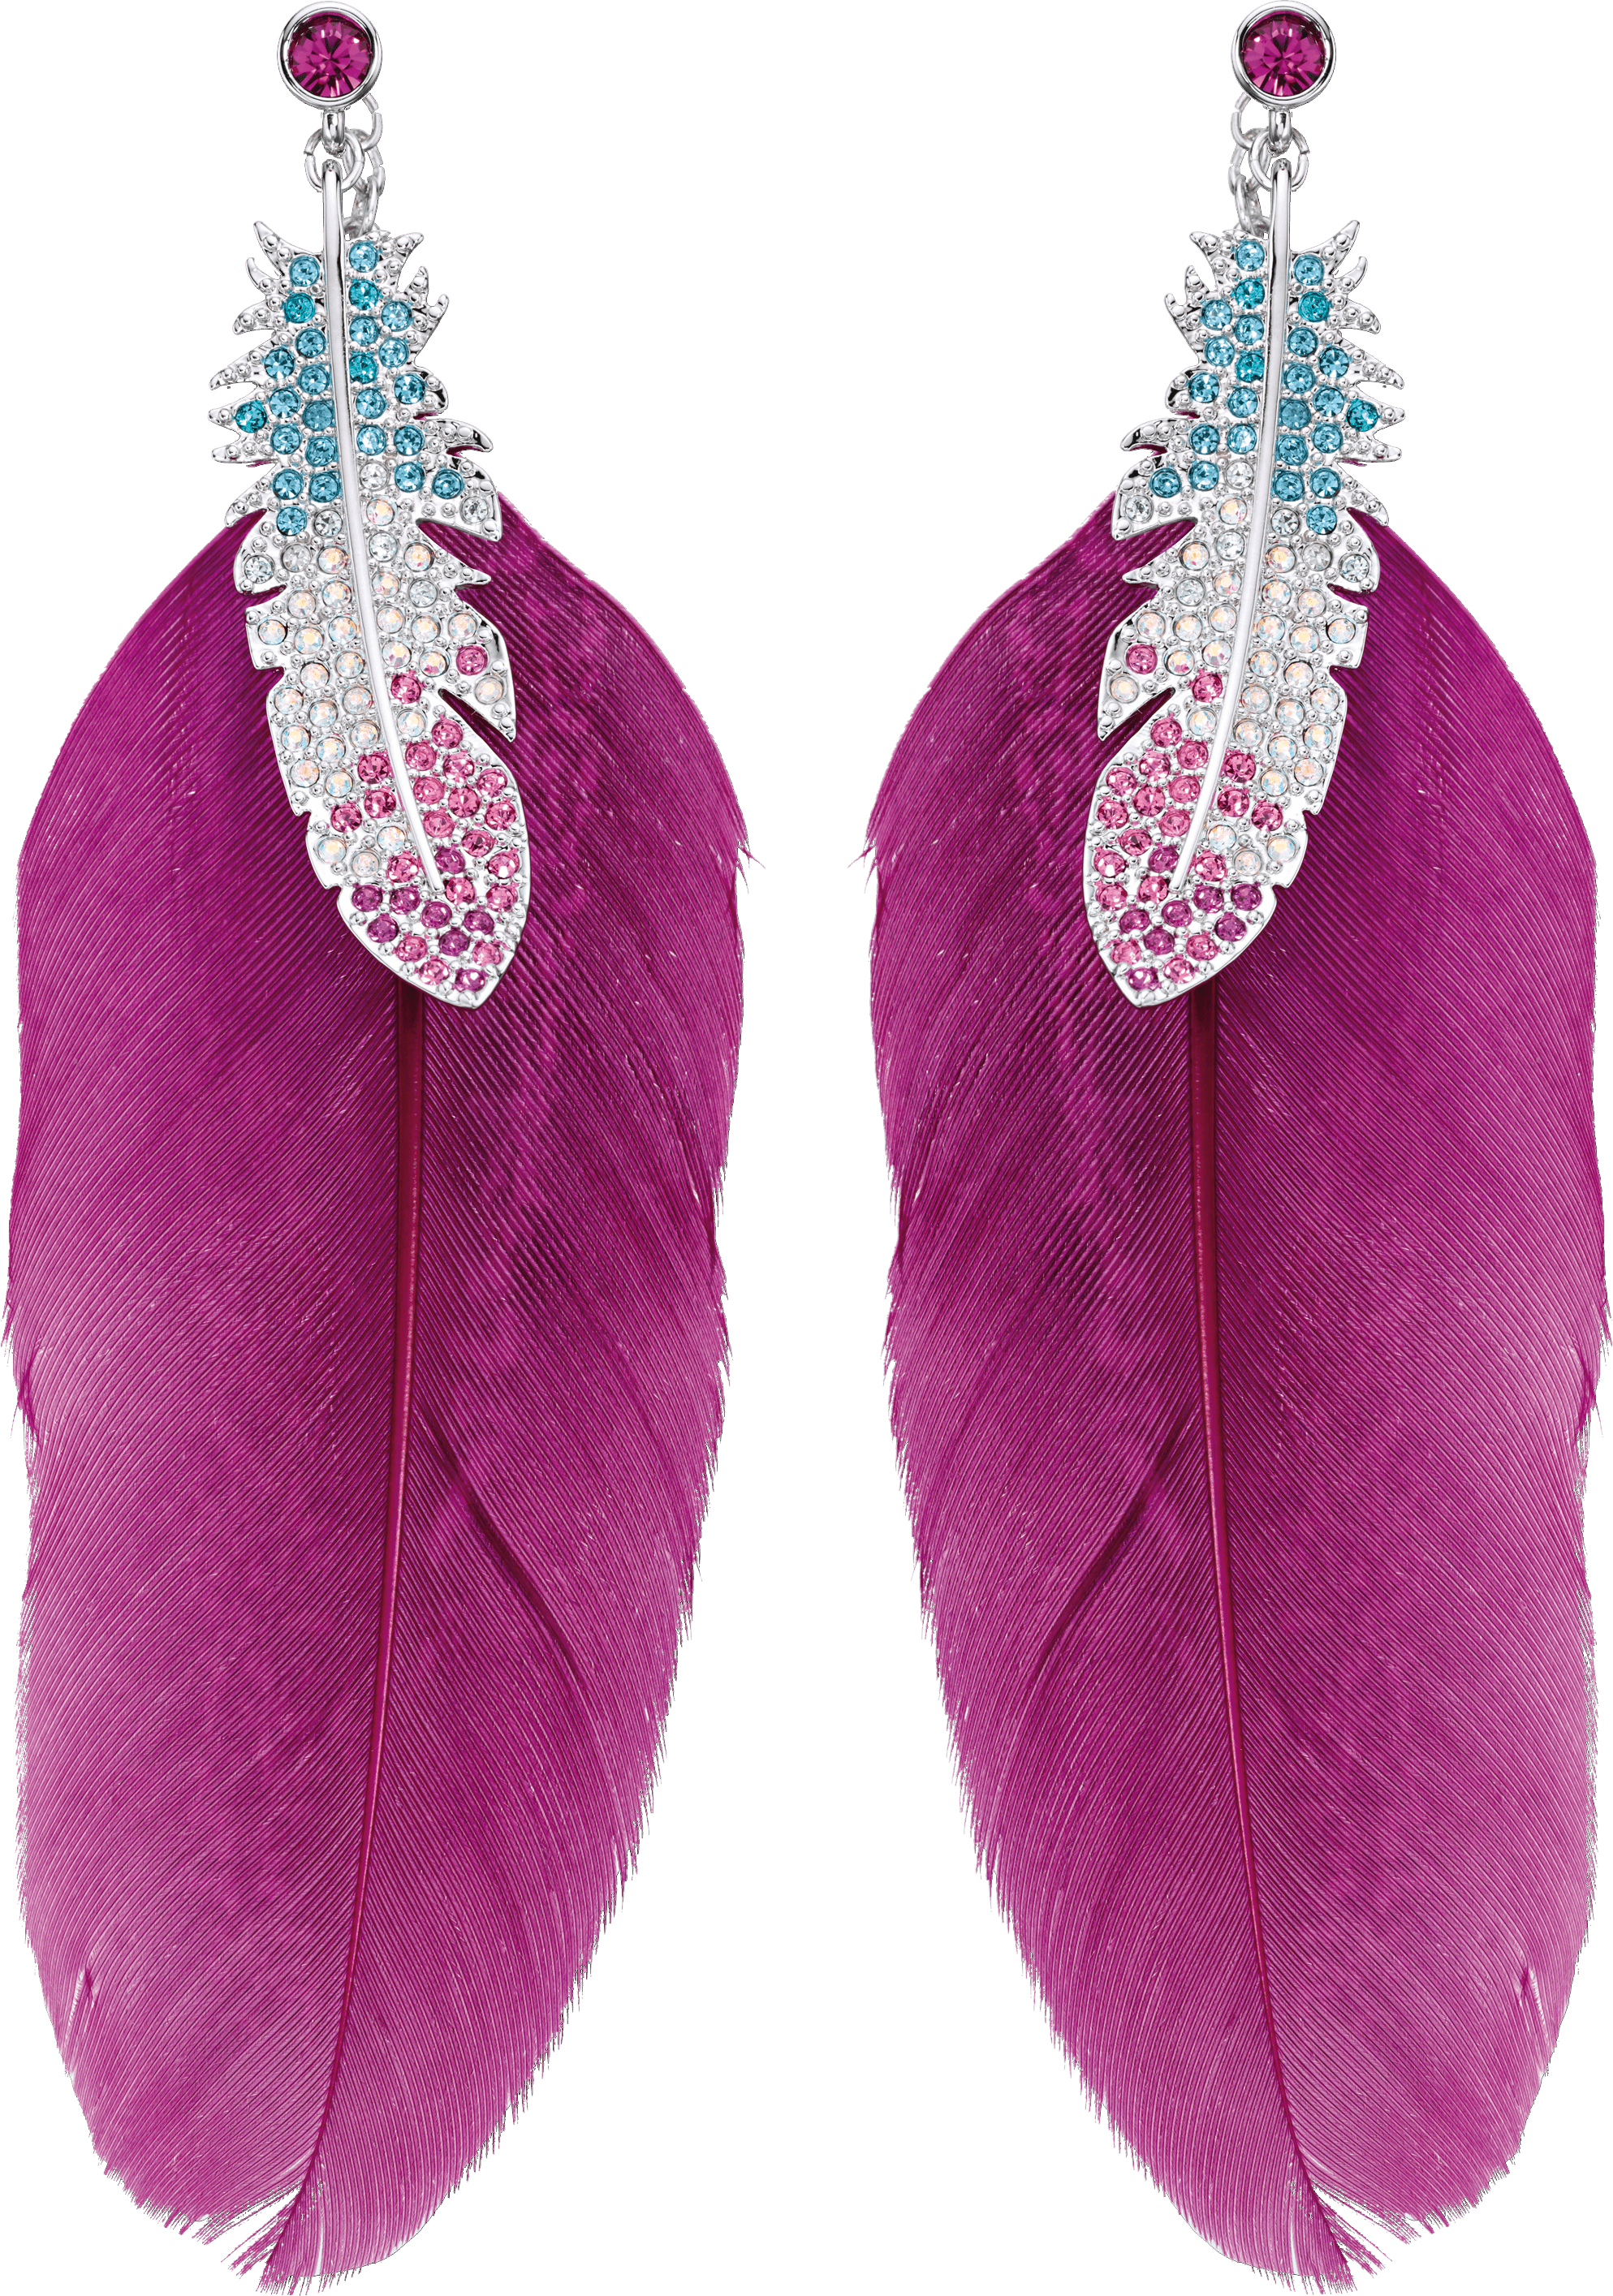 Feather Earrings Png Image PNG Image